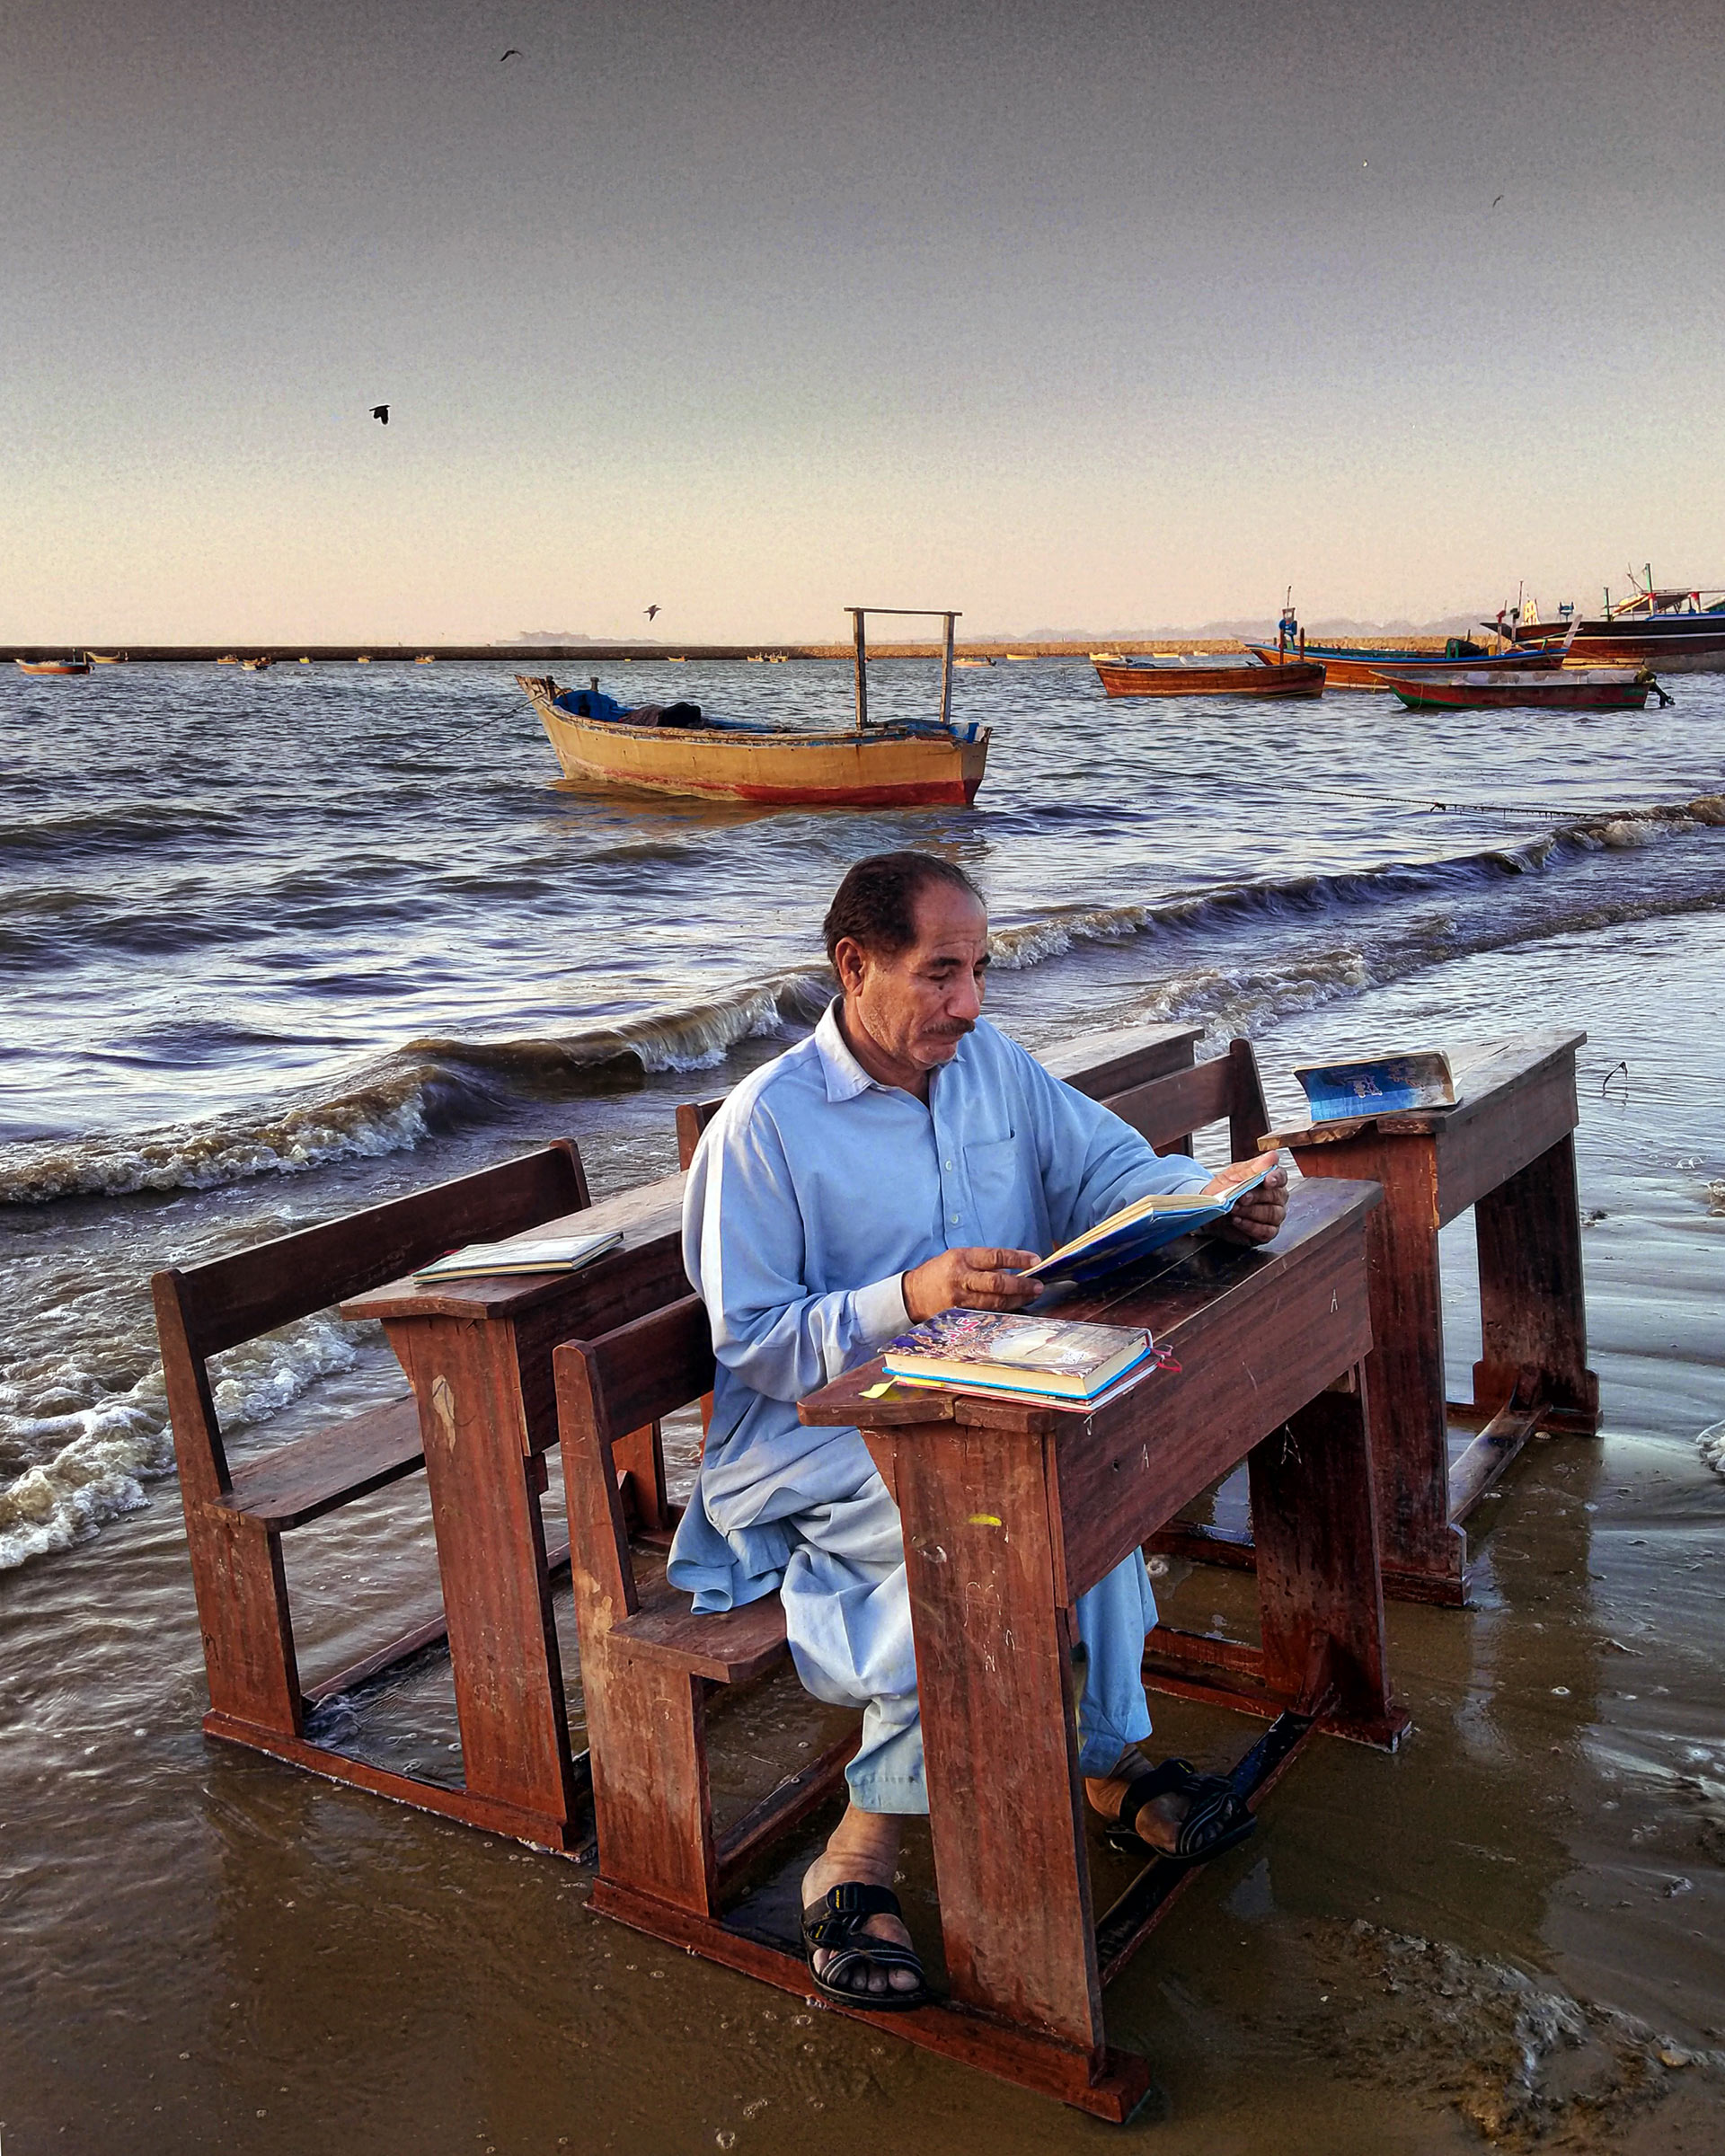 A photograph of a man sitting at a wooden table and with an attached bench on a beach. The waves are lapping around him and there are fishing boats moored in the sea behind him. 